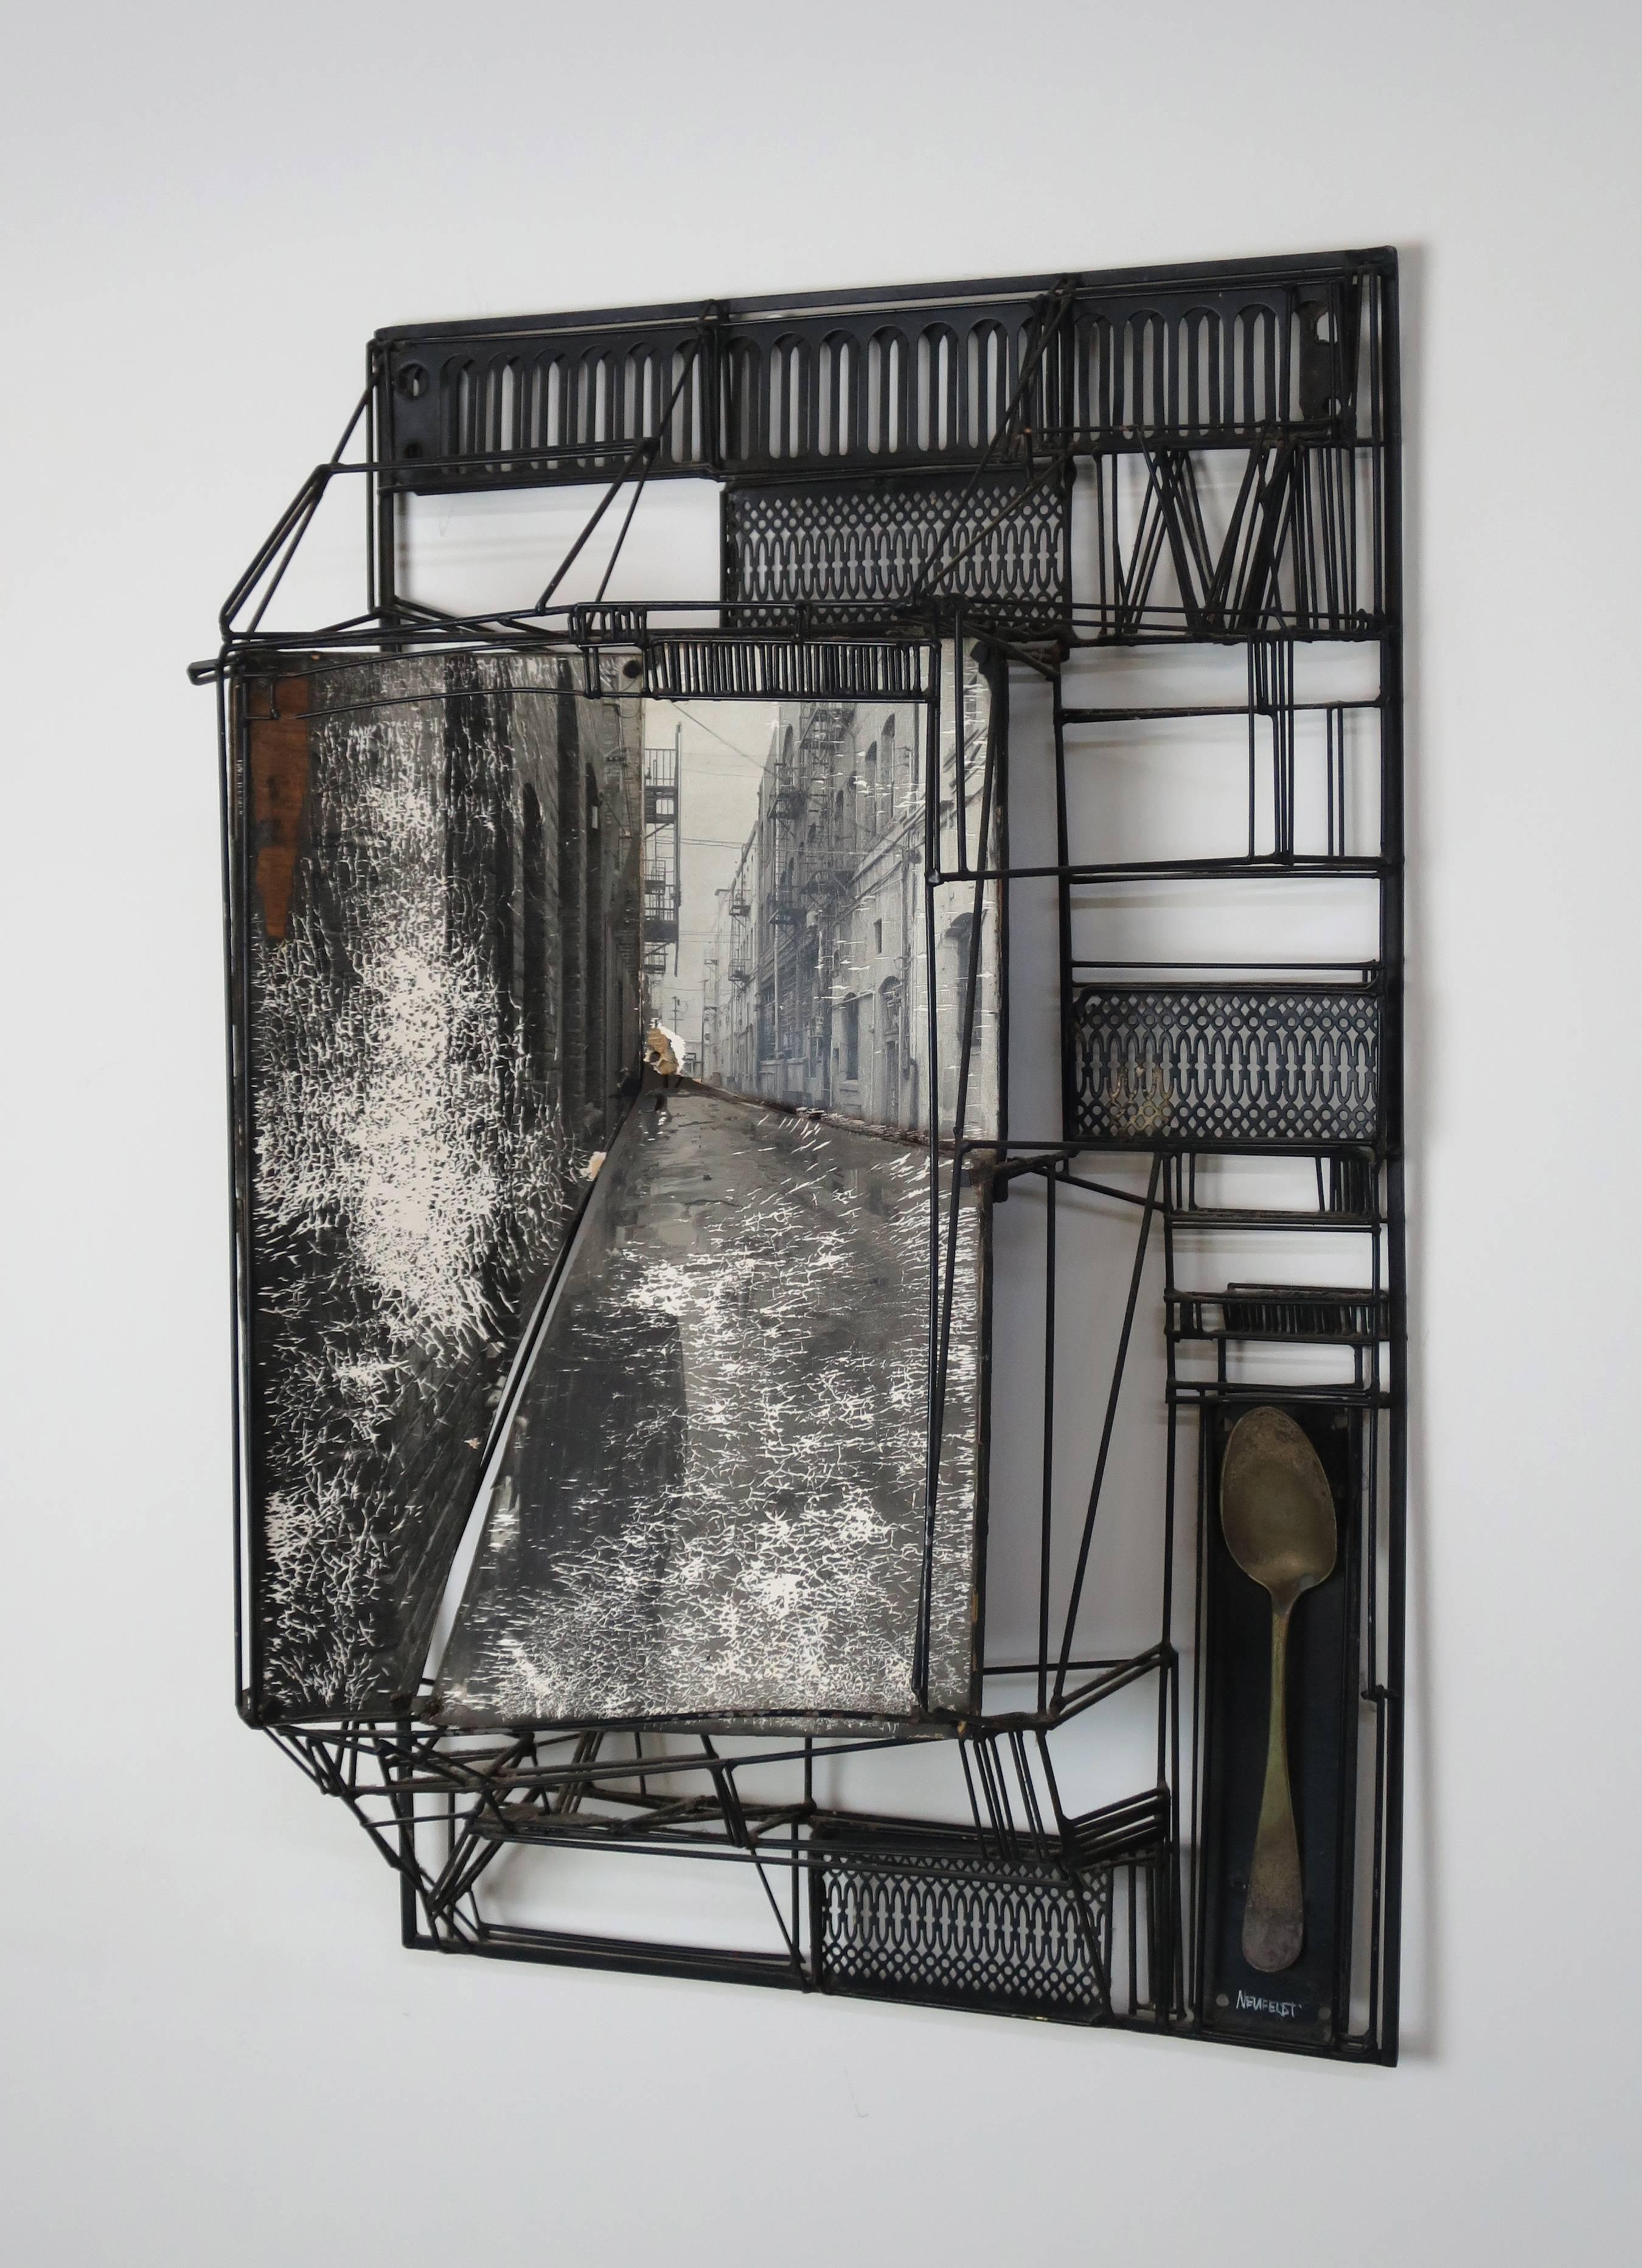 Mixed-media assemblage by Max Neufeldt, circa 1960s. Vintage image appears to be Hell's Kitchen and features an antique spoon.